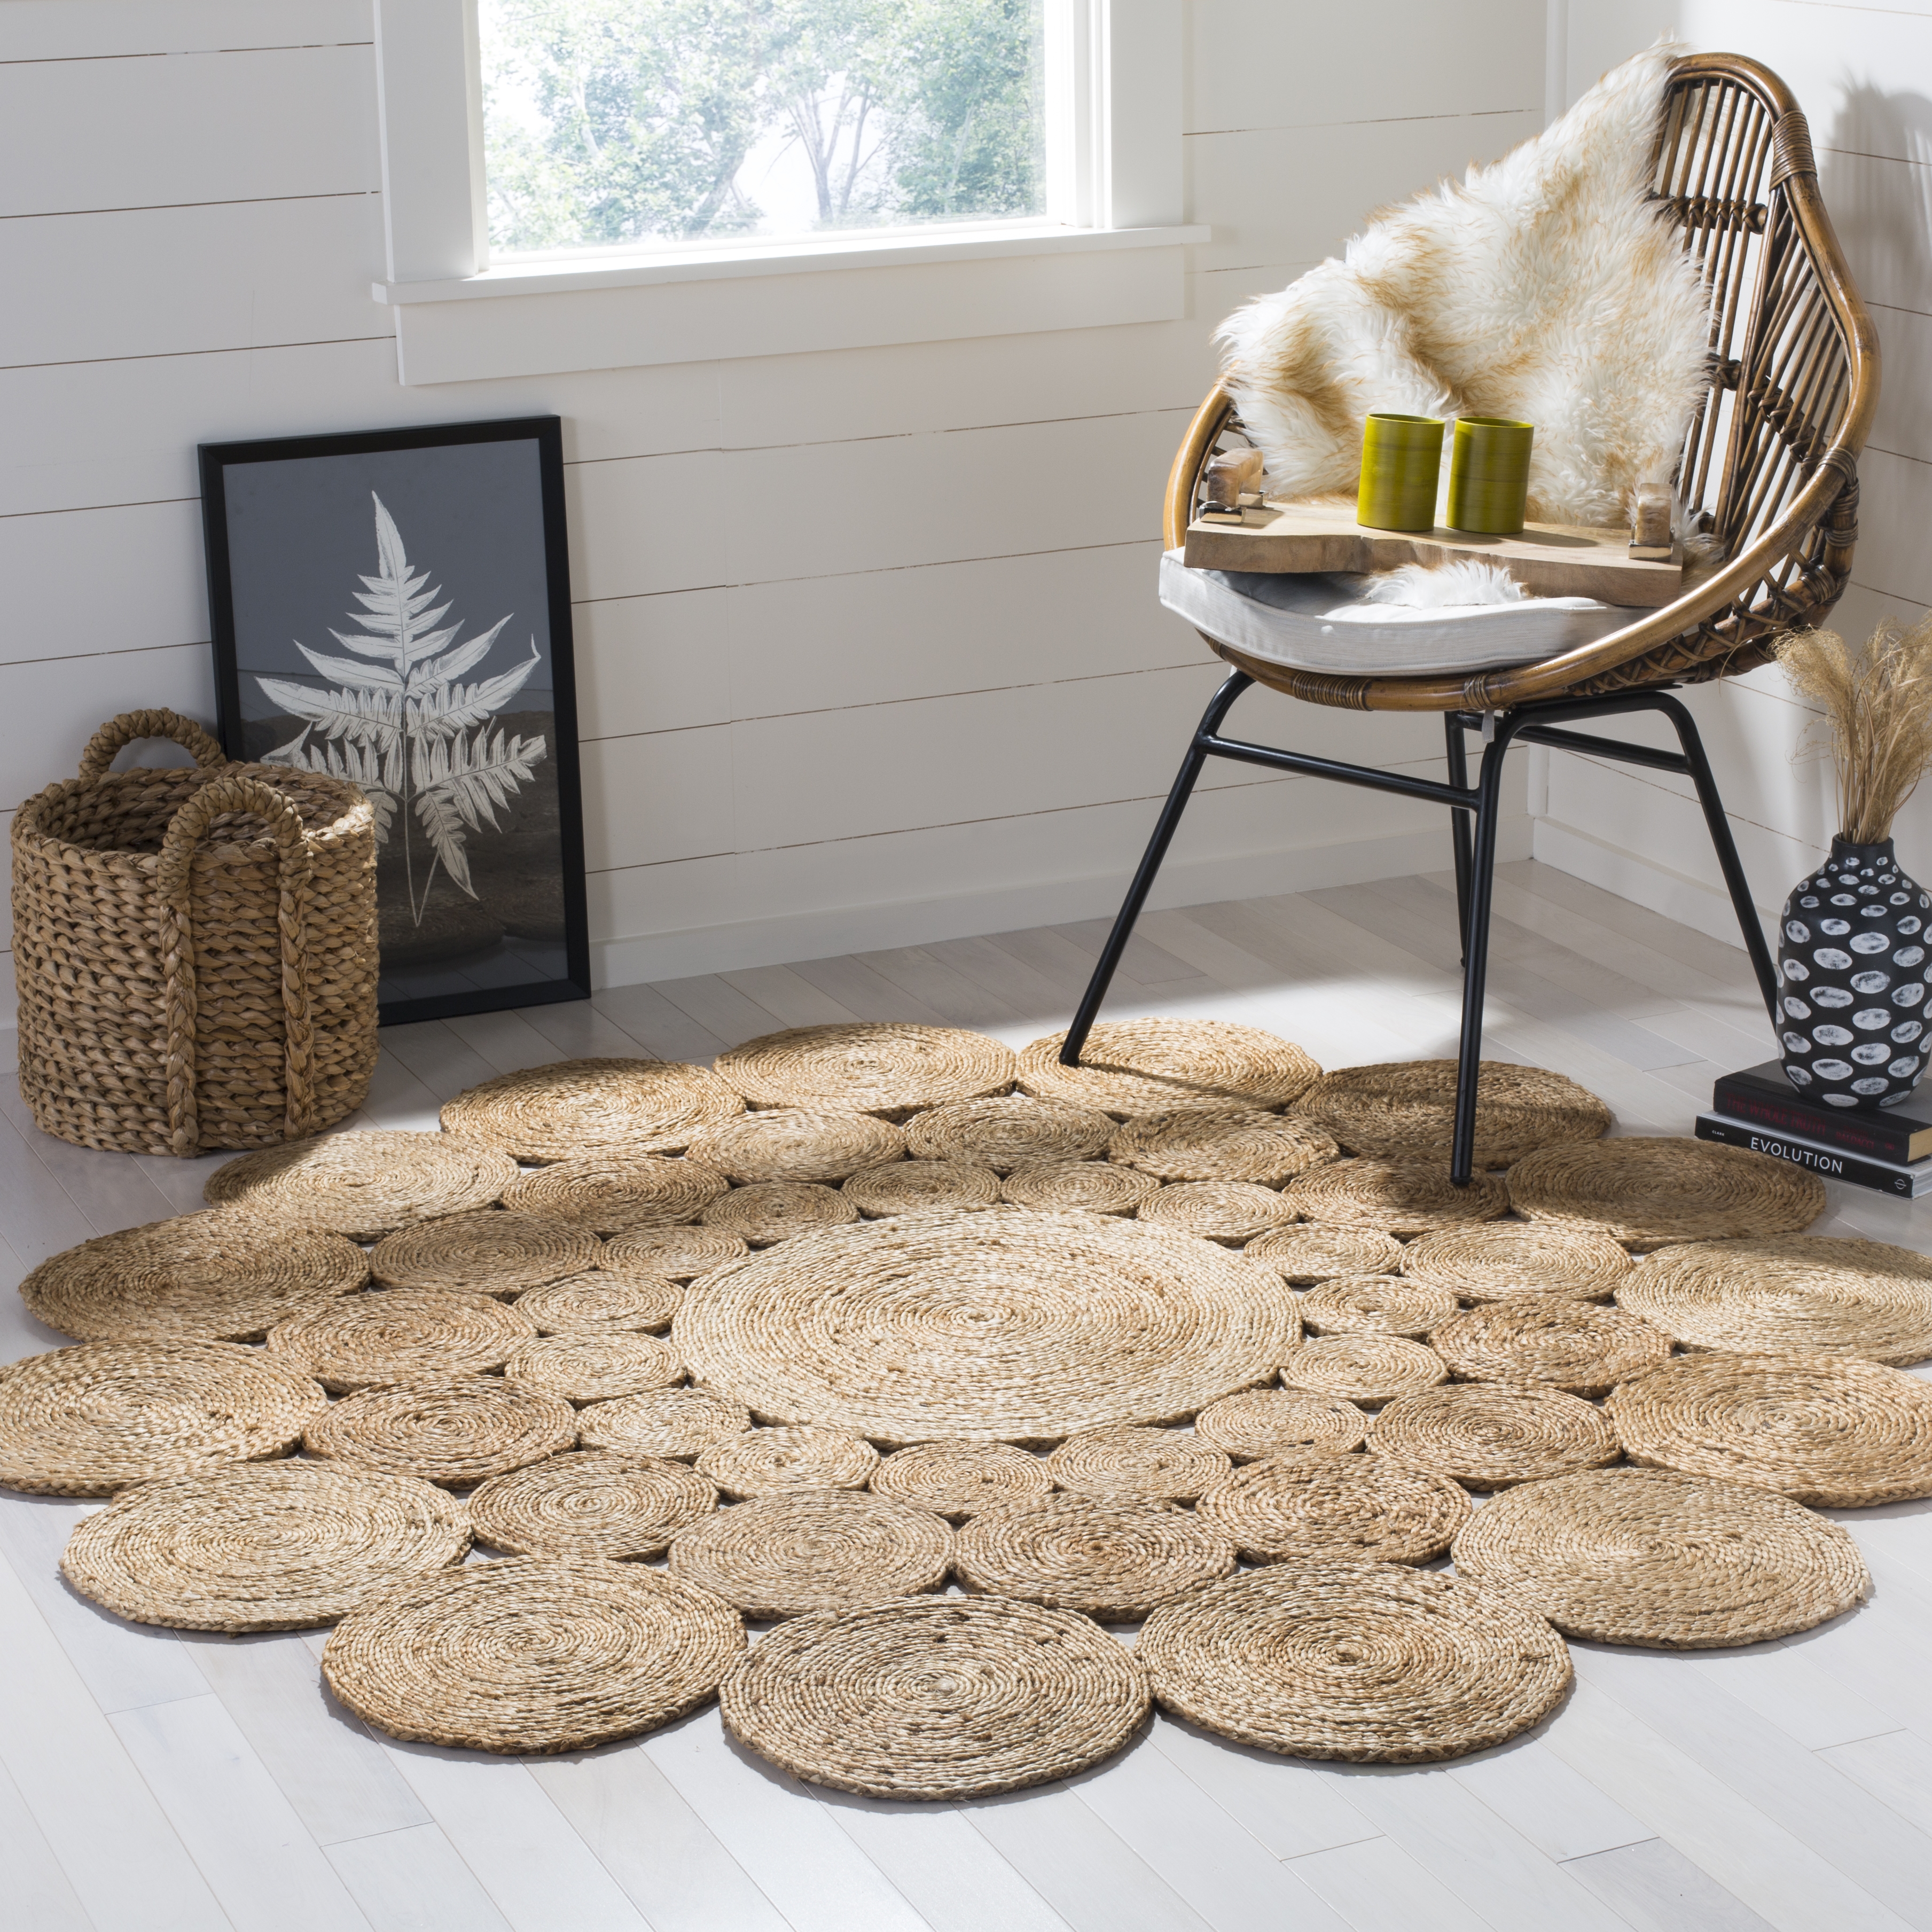 Arlo Home Hand Woven Area Rug, NF363A, Natural,  3' X 3' Round - Image 1